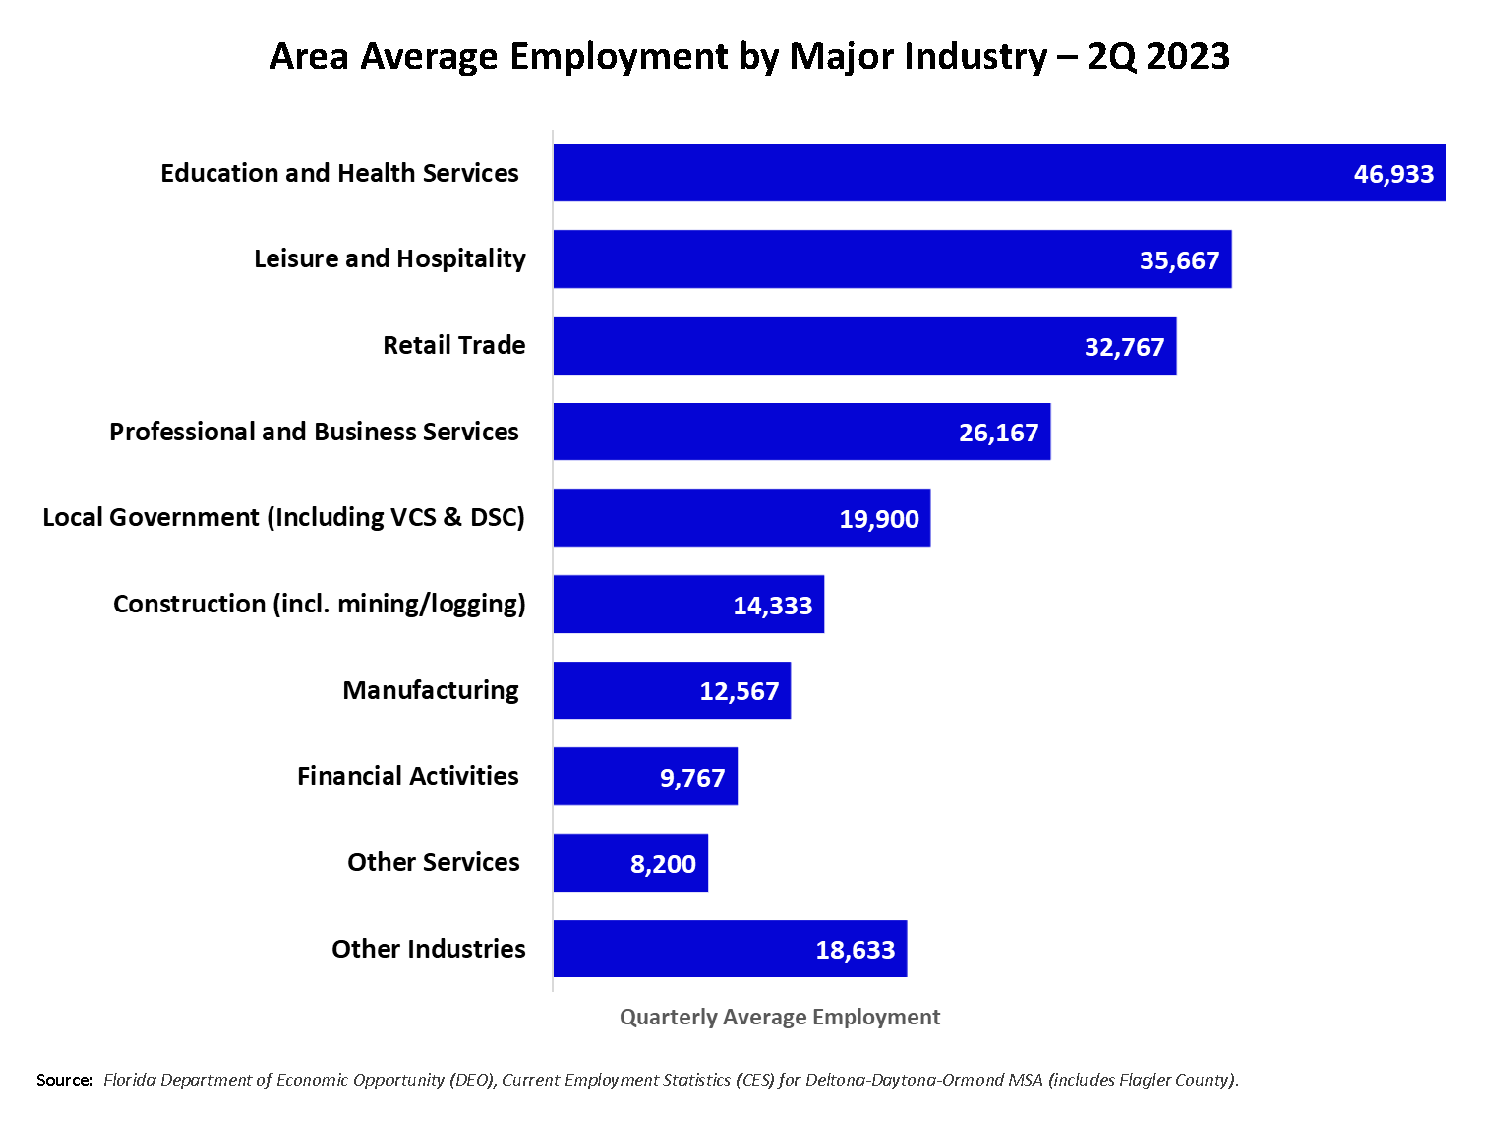 Area Employment by Major Industry chart. Click image link for pdf with details.